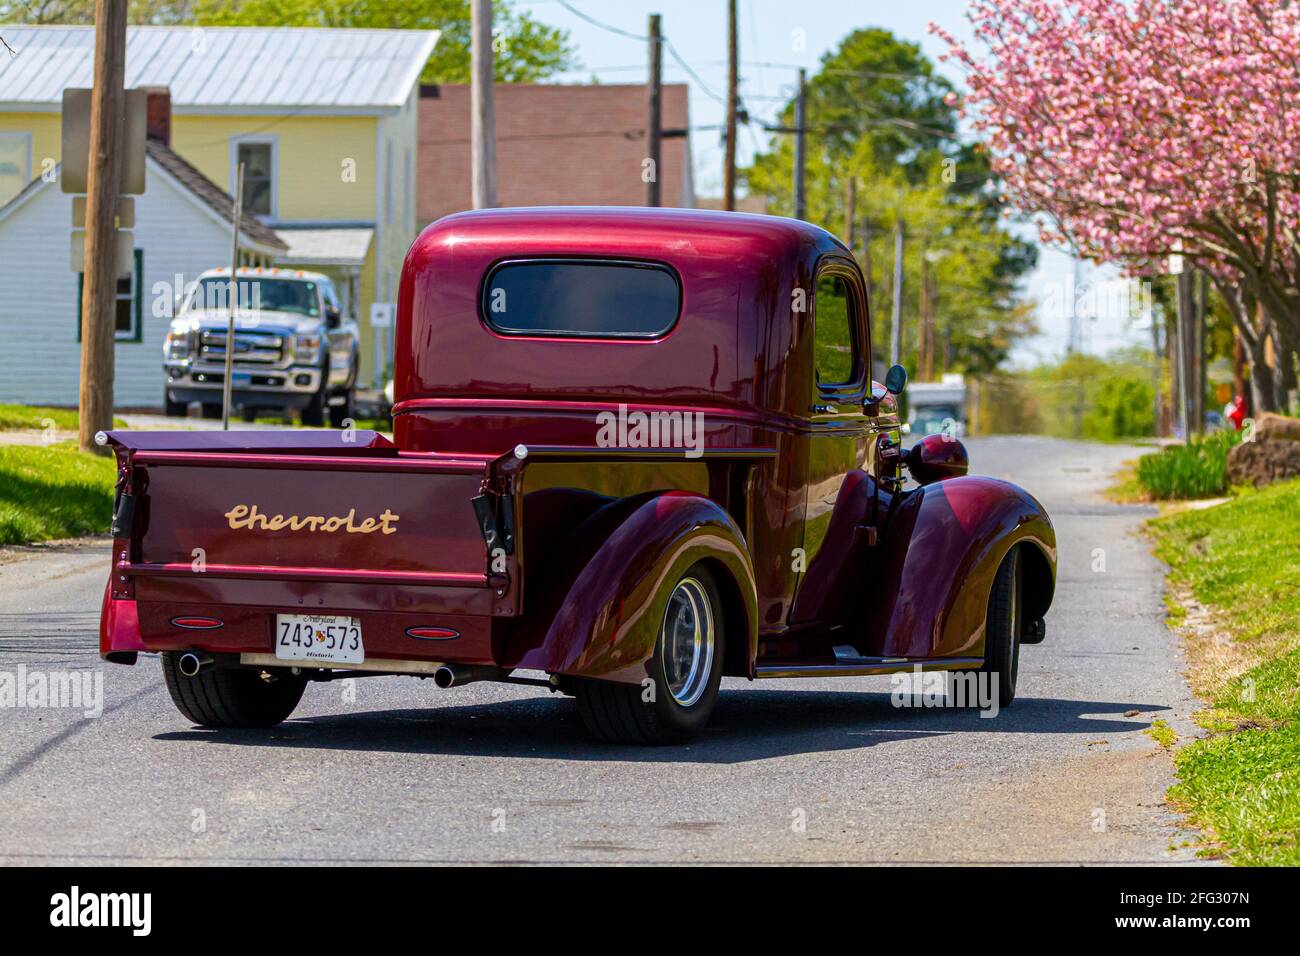 Vienna, MD, USA 04-16-2021: A vintage red shiny Chevrolet Master series pickup truck (built between 1933-1940) is on the road at a residential neighbo Stock Photo